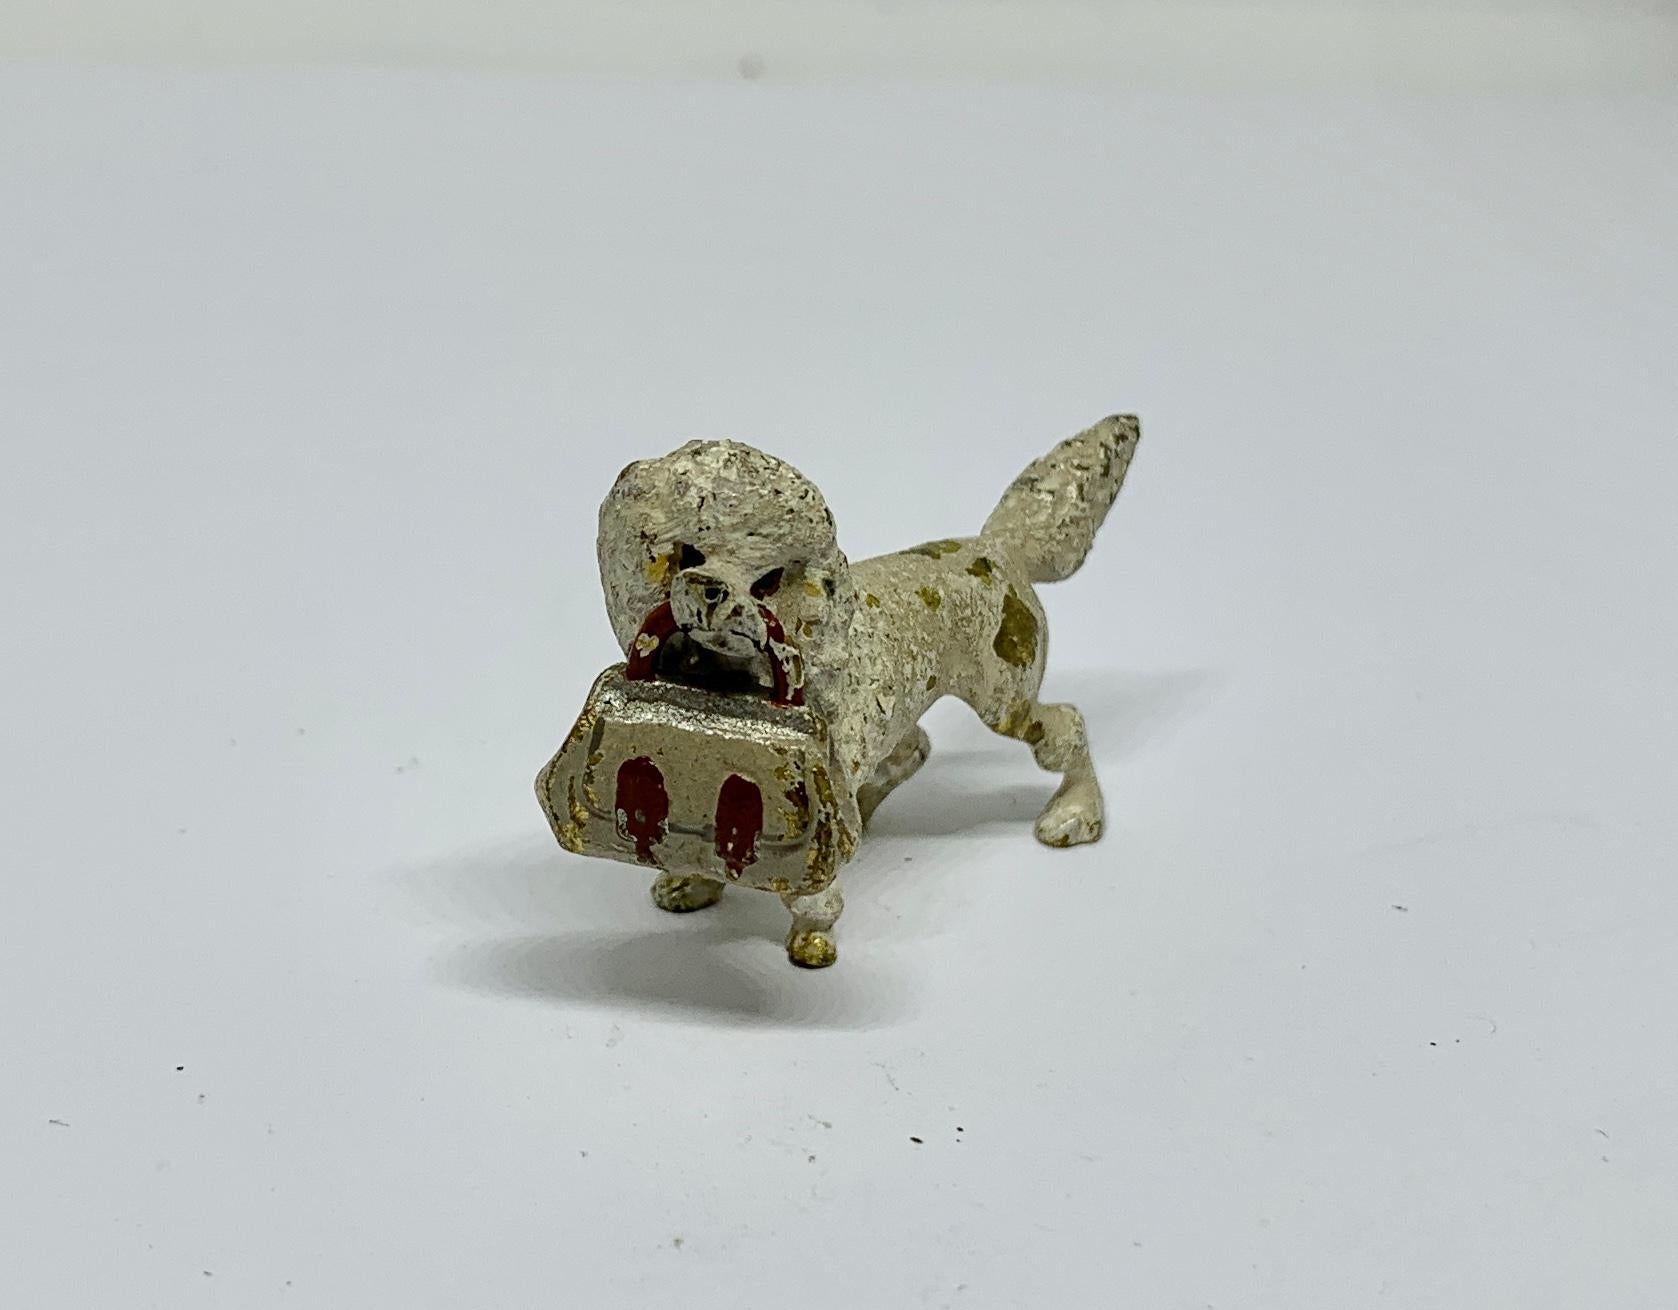 THIS IS A SUPERB AUSTRIAN VIENNA BRONZE OF A WHITE POODLE DOG CARRYING A PURSE. 
This wonderful antique Austrian Vienna Bronze (Bronze de Vienne, Wiener Bronze, Cold Painted Bronze) dates to circa 1900-1930.  The bronze is very possibly made by